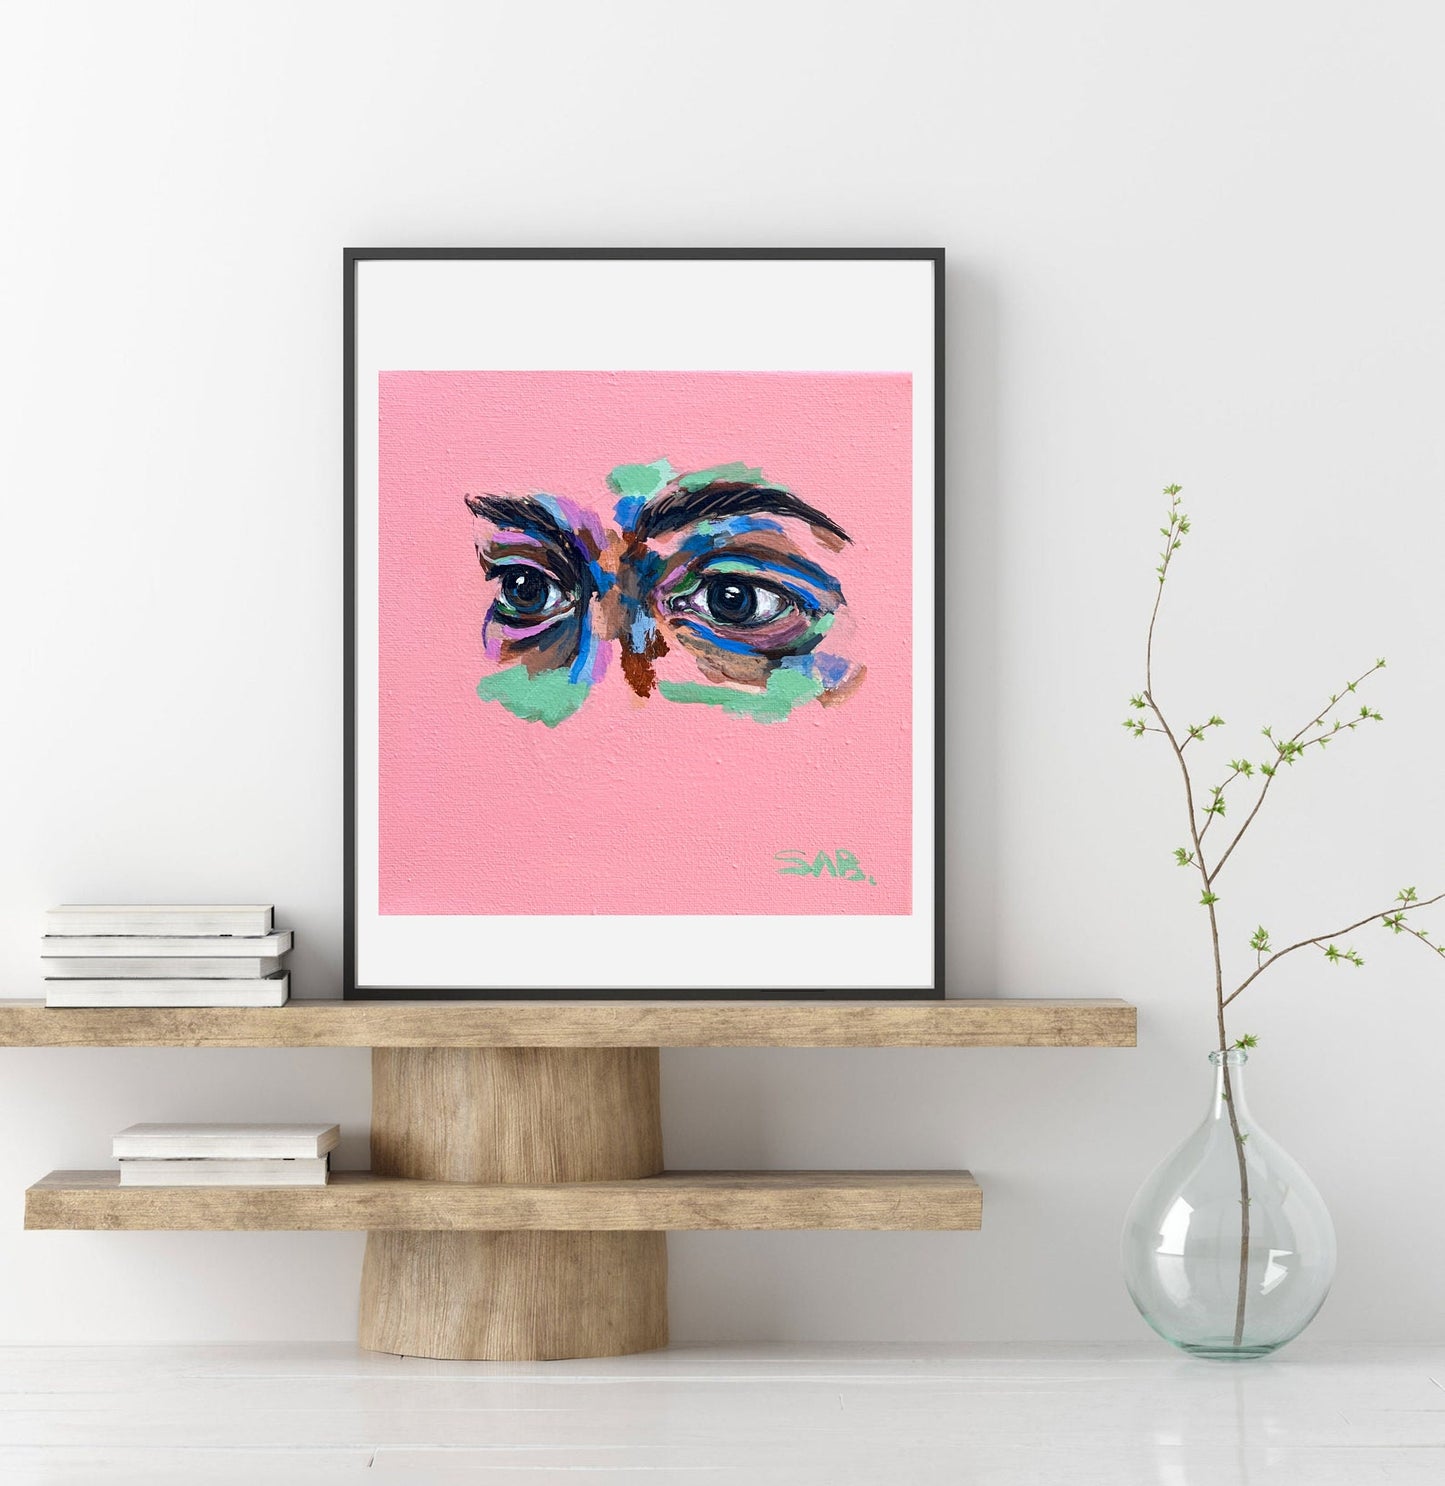 Abstract acrylic eye painting by SABtheartist